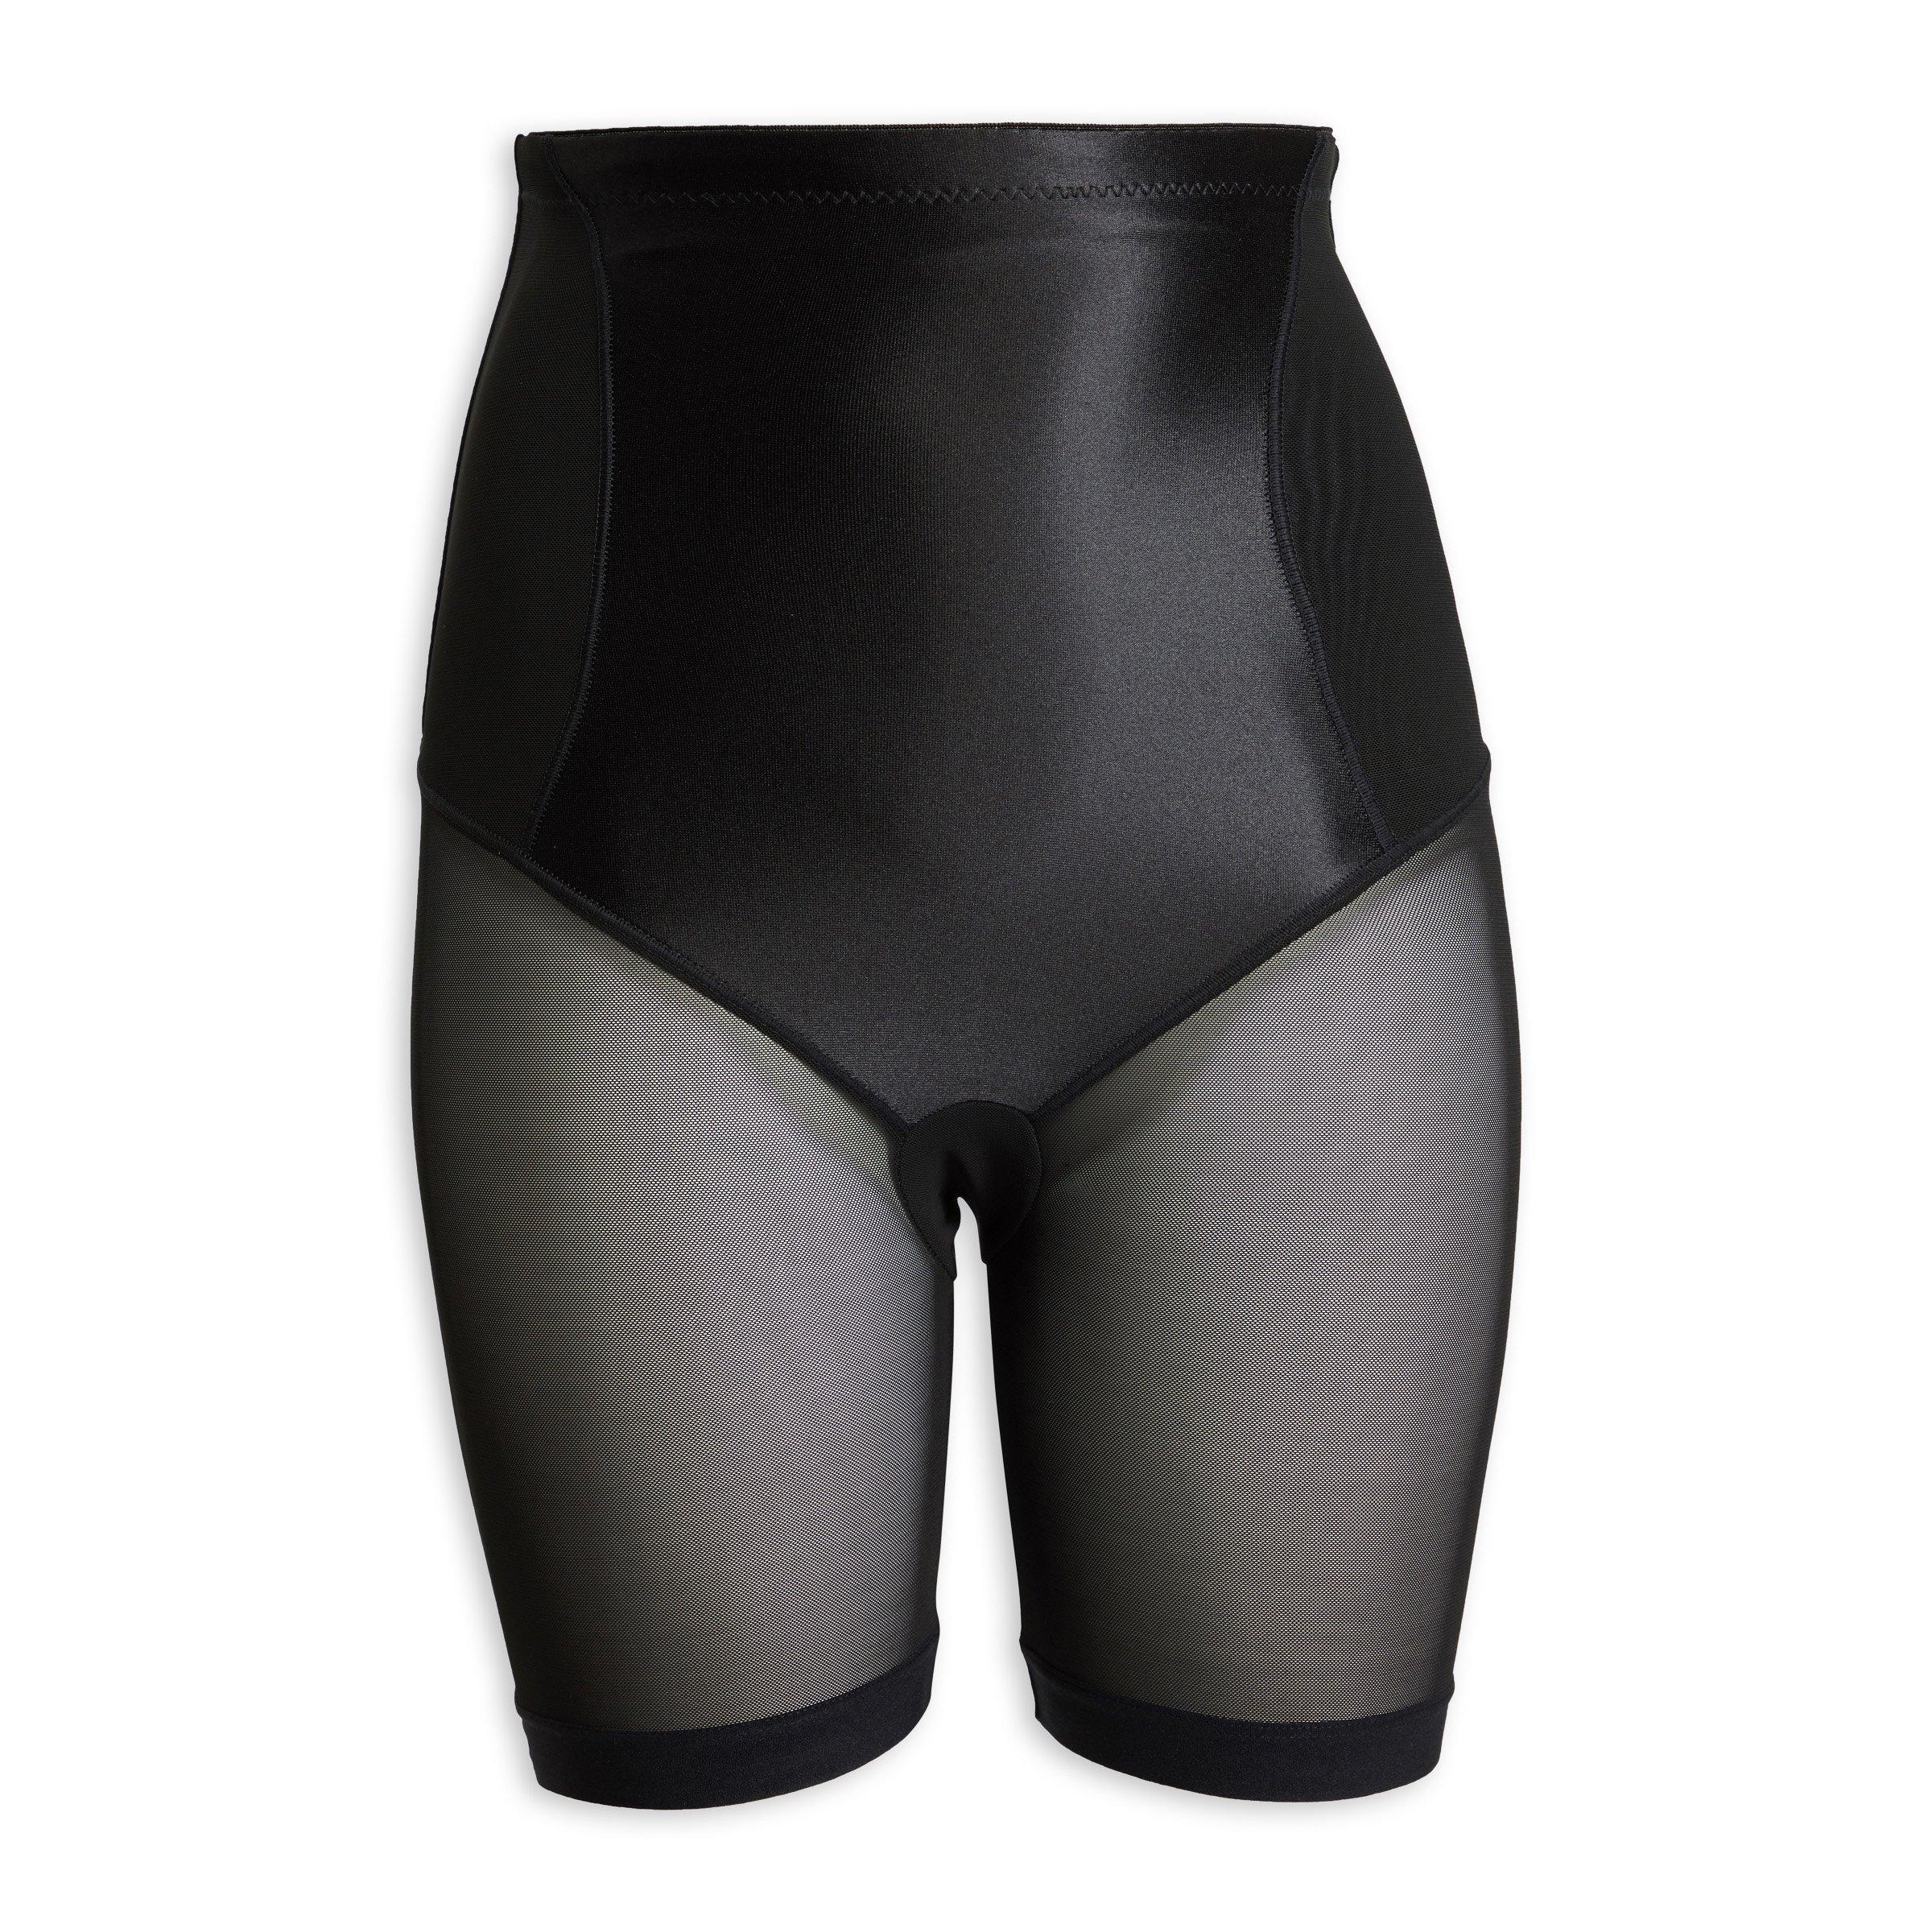 High Waisted Body Shaper Pants Black TruVon, South Africa